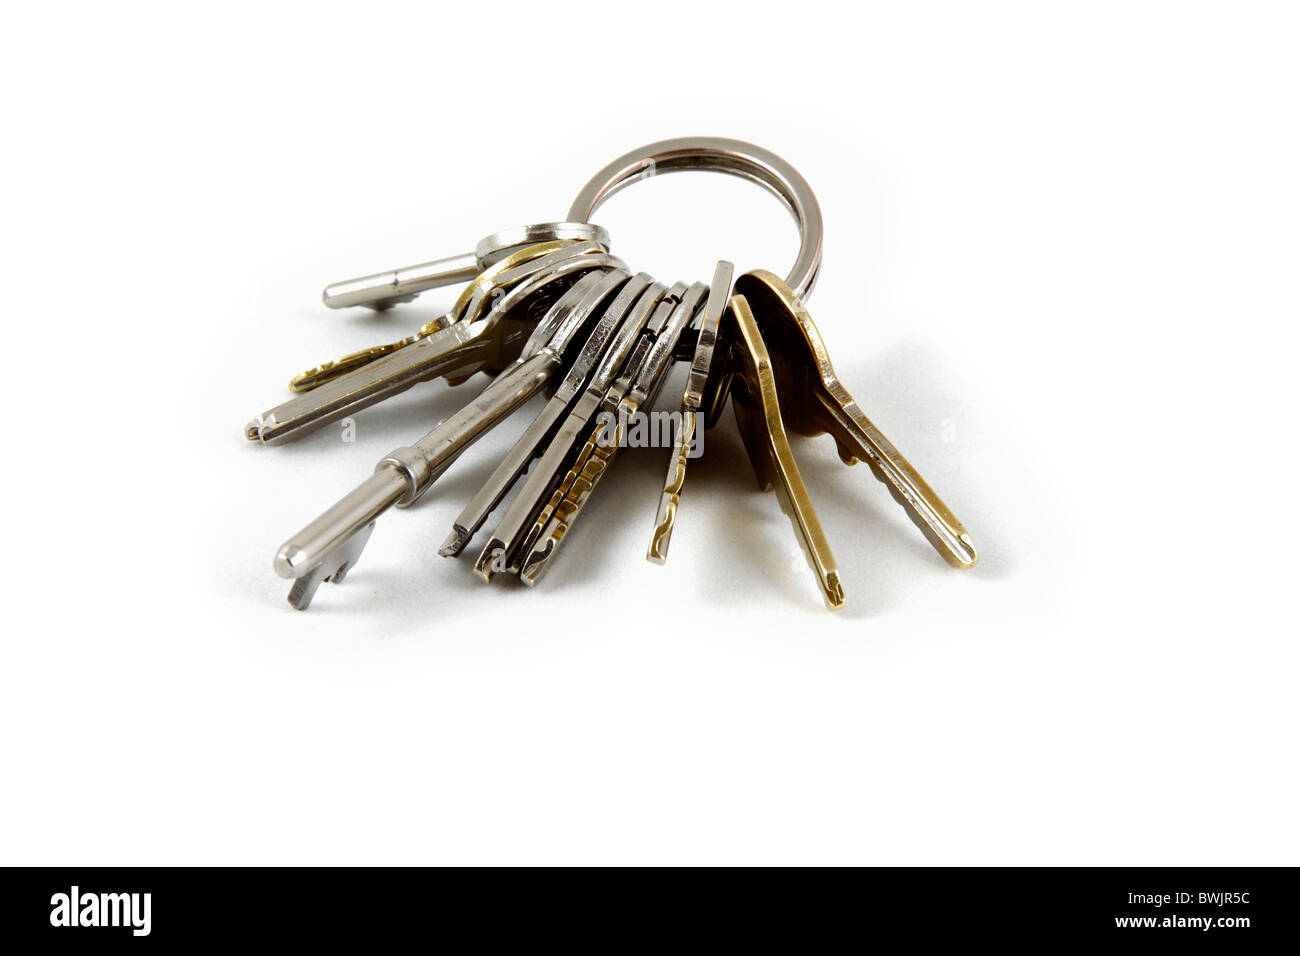 A bunch of Keys on a key ring Stock Photo